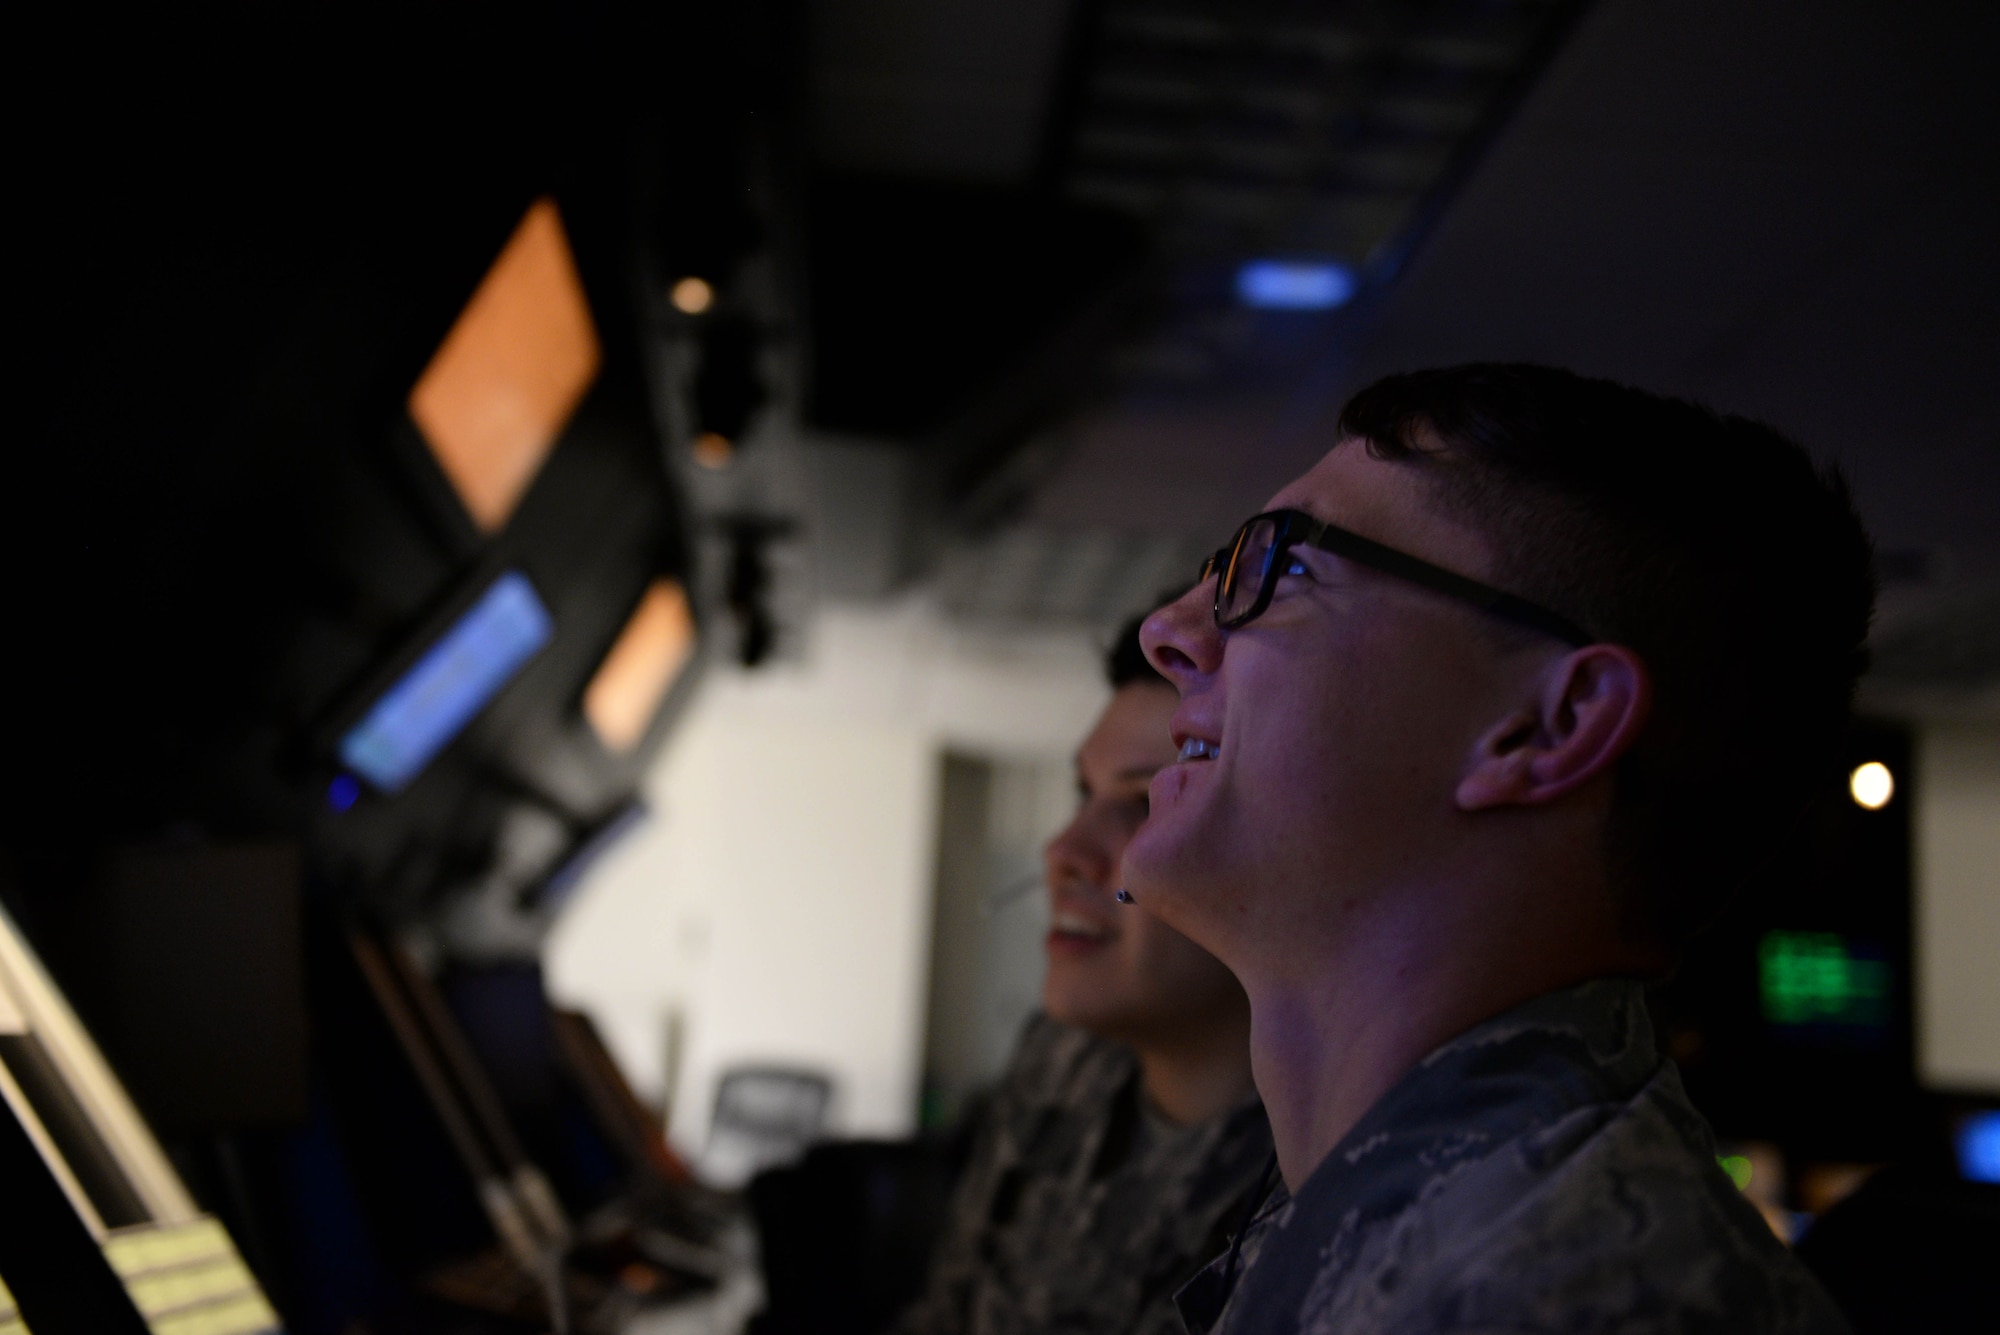 Senior Airman Dylan Fivecoate, 14th Operations Support Squadron air traffic controller, and Airman 1st Class Julian Kelhower, 14th OSS air traffic controller, look at air traffic March 25, 2019, on Columbus Air Force Base, Mississippi. In March 2019, Fivecoate was announced as the Air Education and Training Command winner for the 2019 Air Force Sergeants Association Pitsenbarger Award.  (U.S. Air Force photo by Airman Hannah Bean)